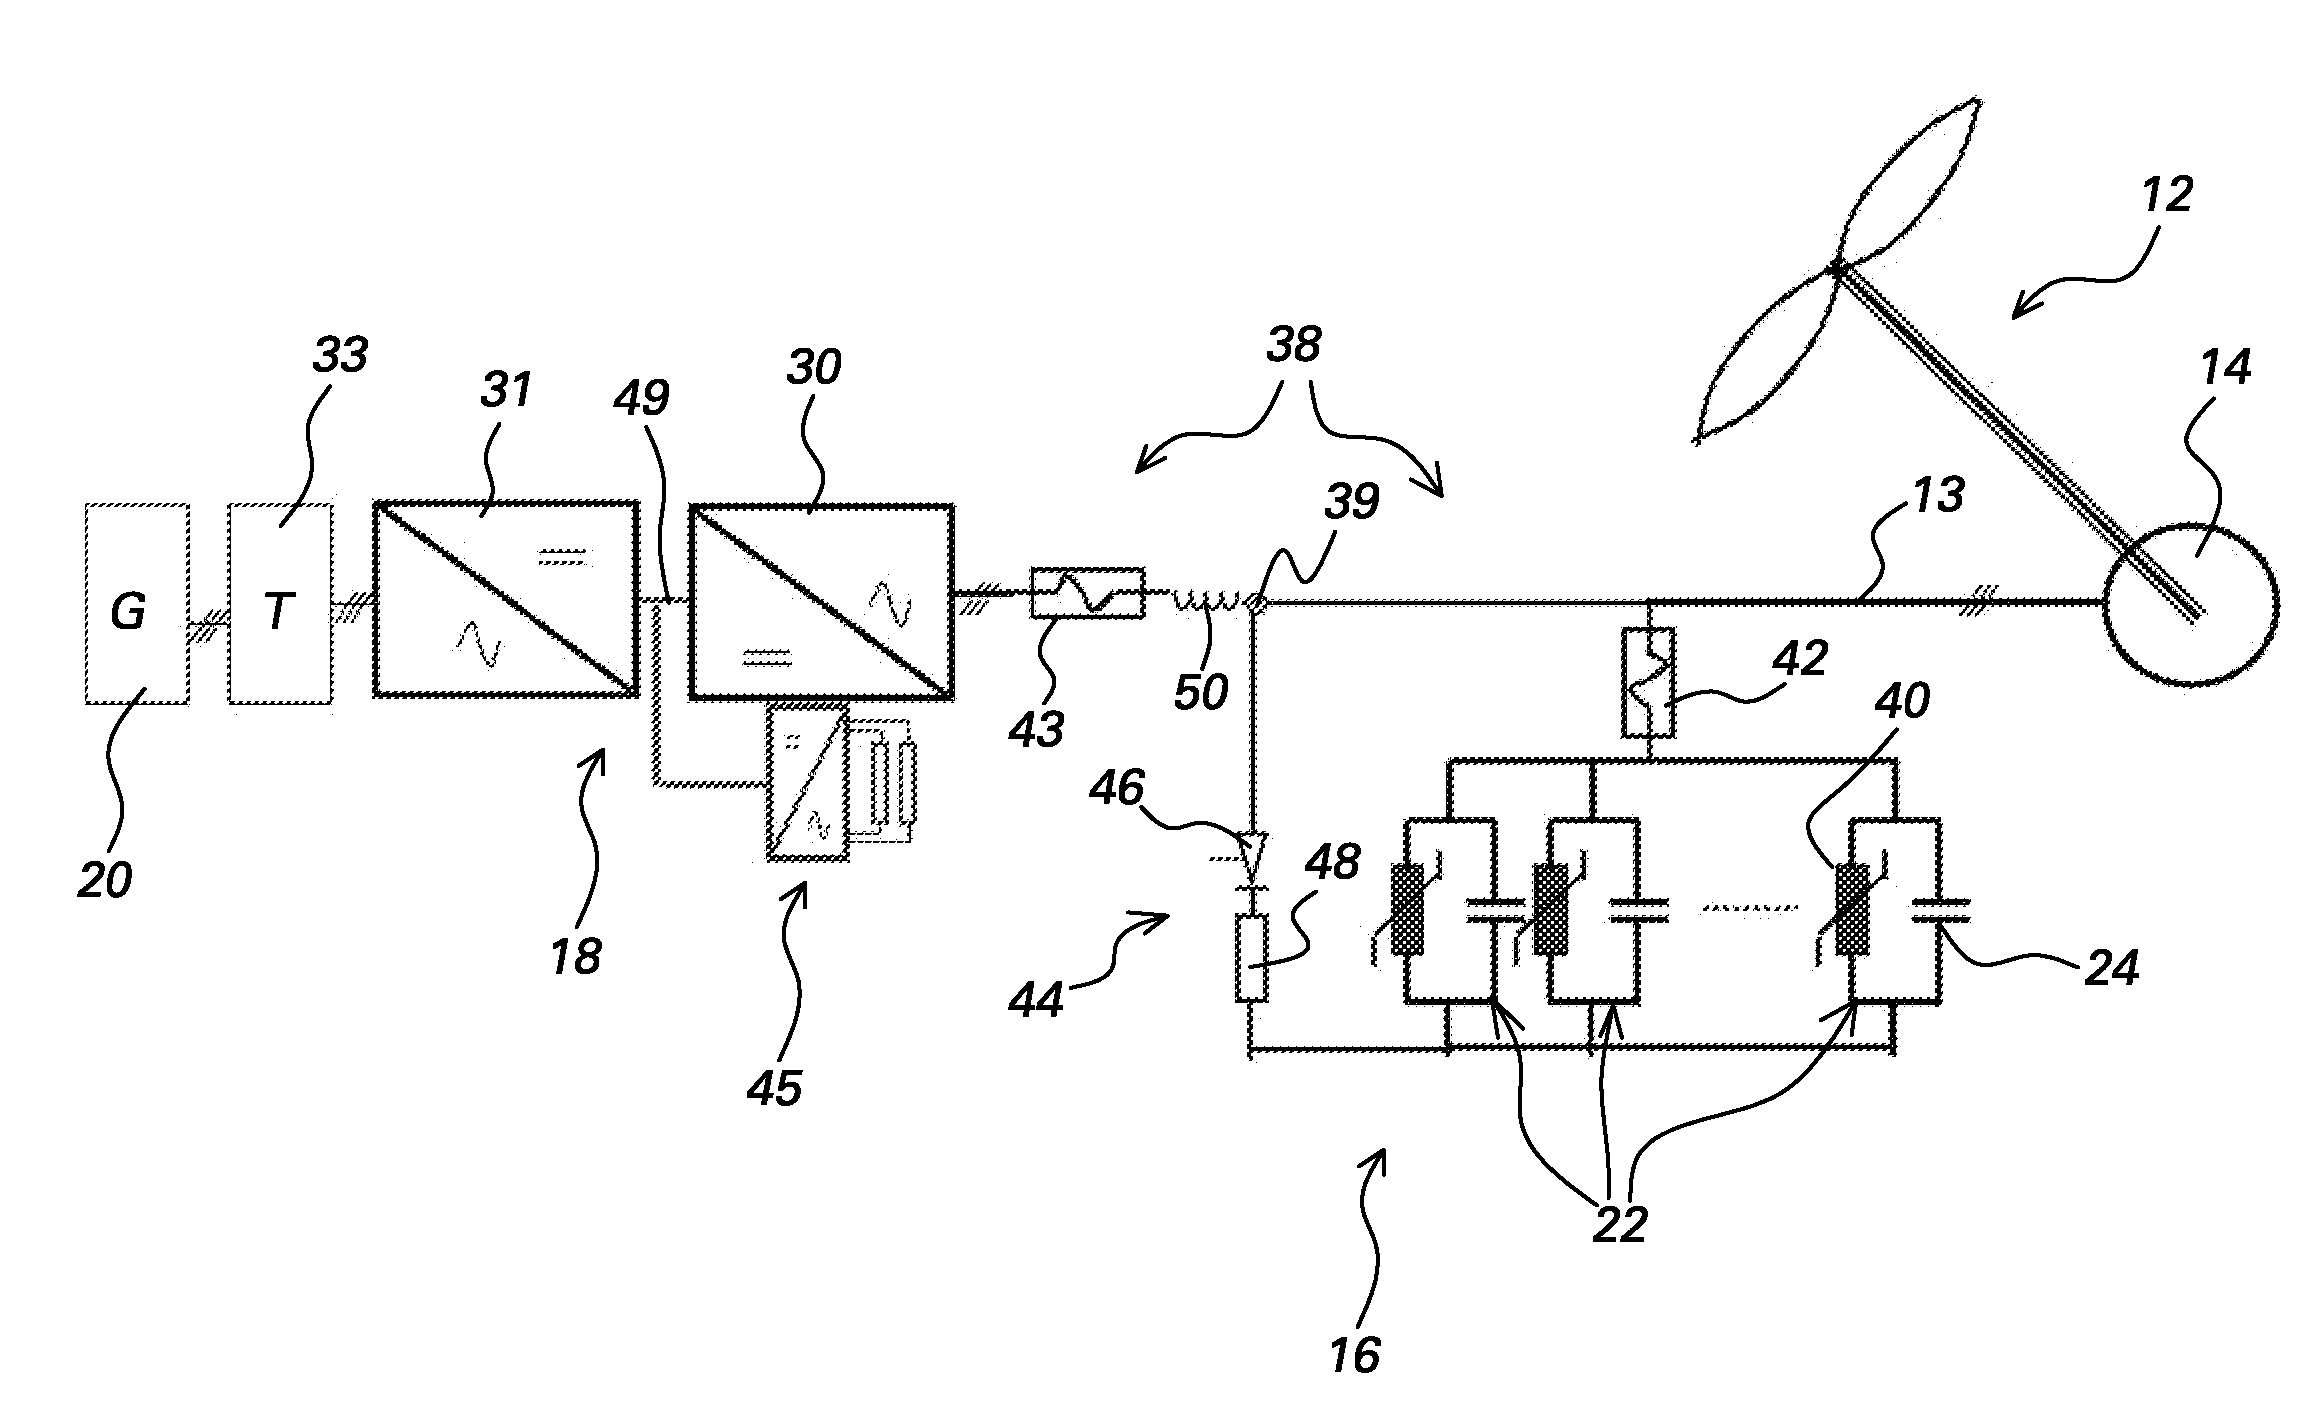 Electric power generation with magnetically geared machine